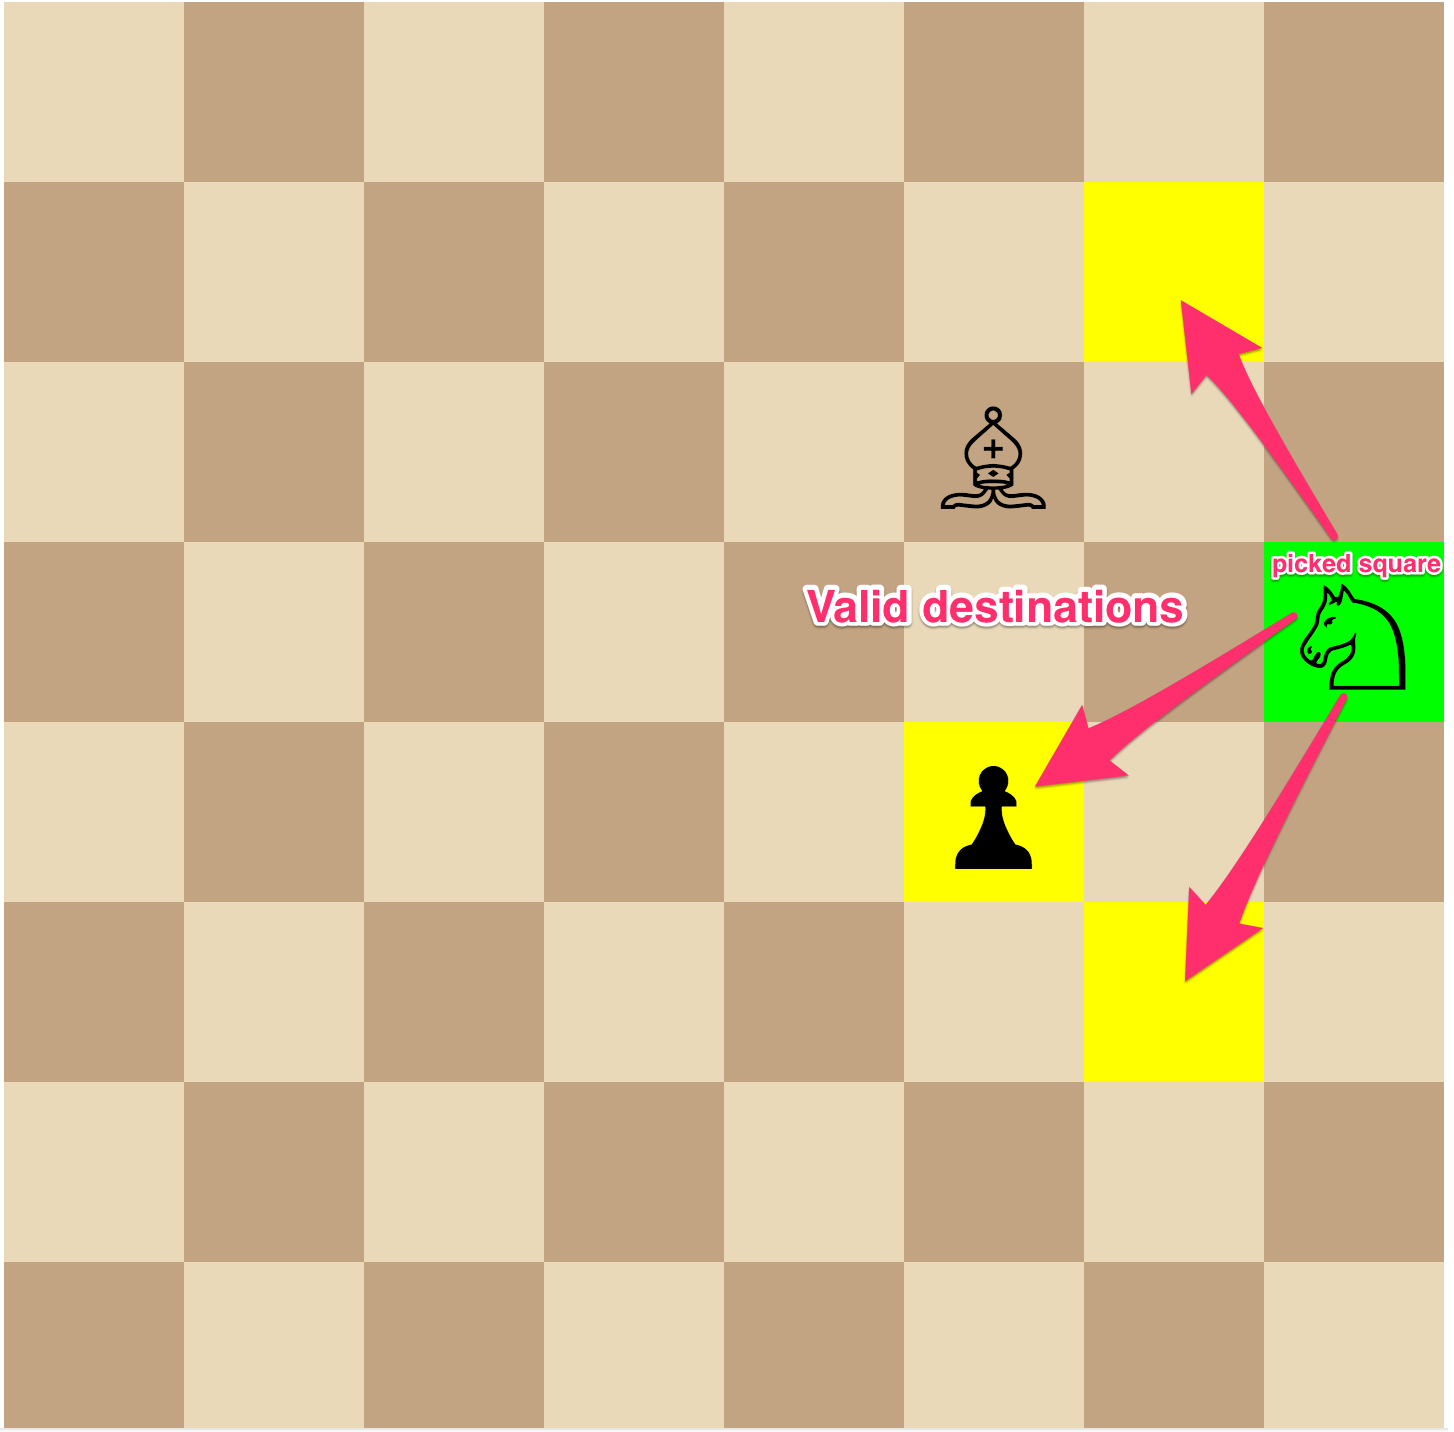 Tutorial On Chess Notation